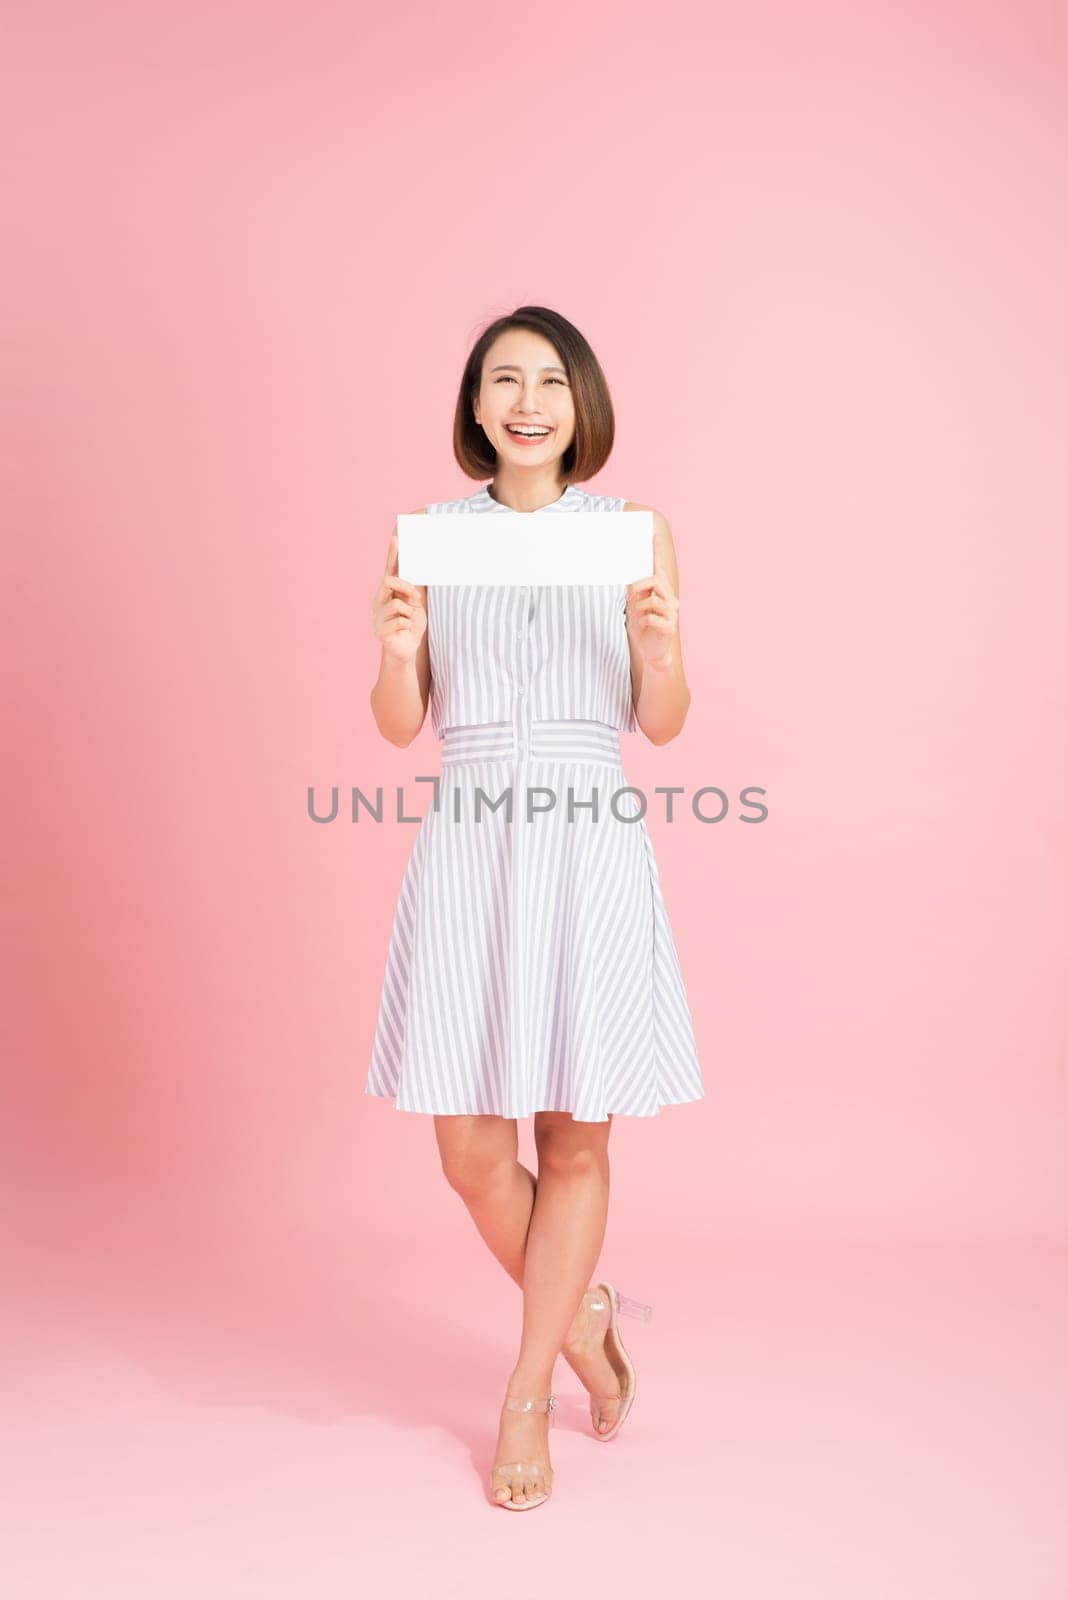 Attractive woman holding paper blank in her hands. Portrait of emotional young woman showing surprised and happy emotions